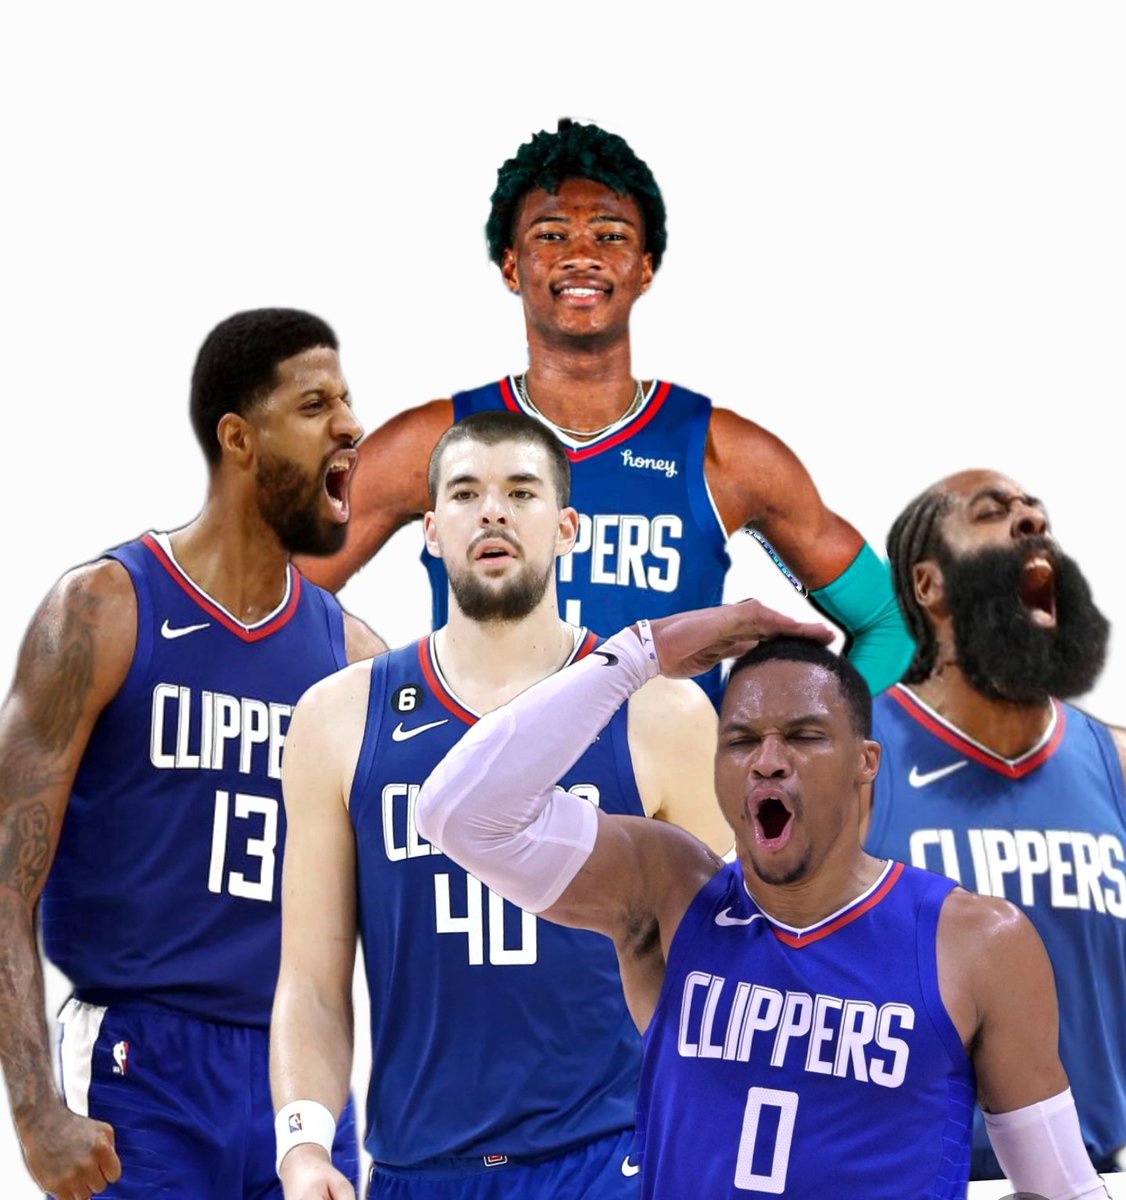 I need this lineup
#clippers